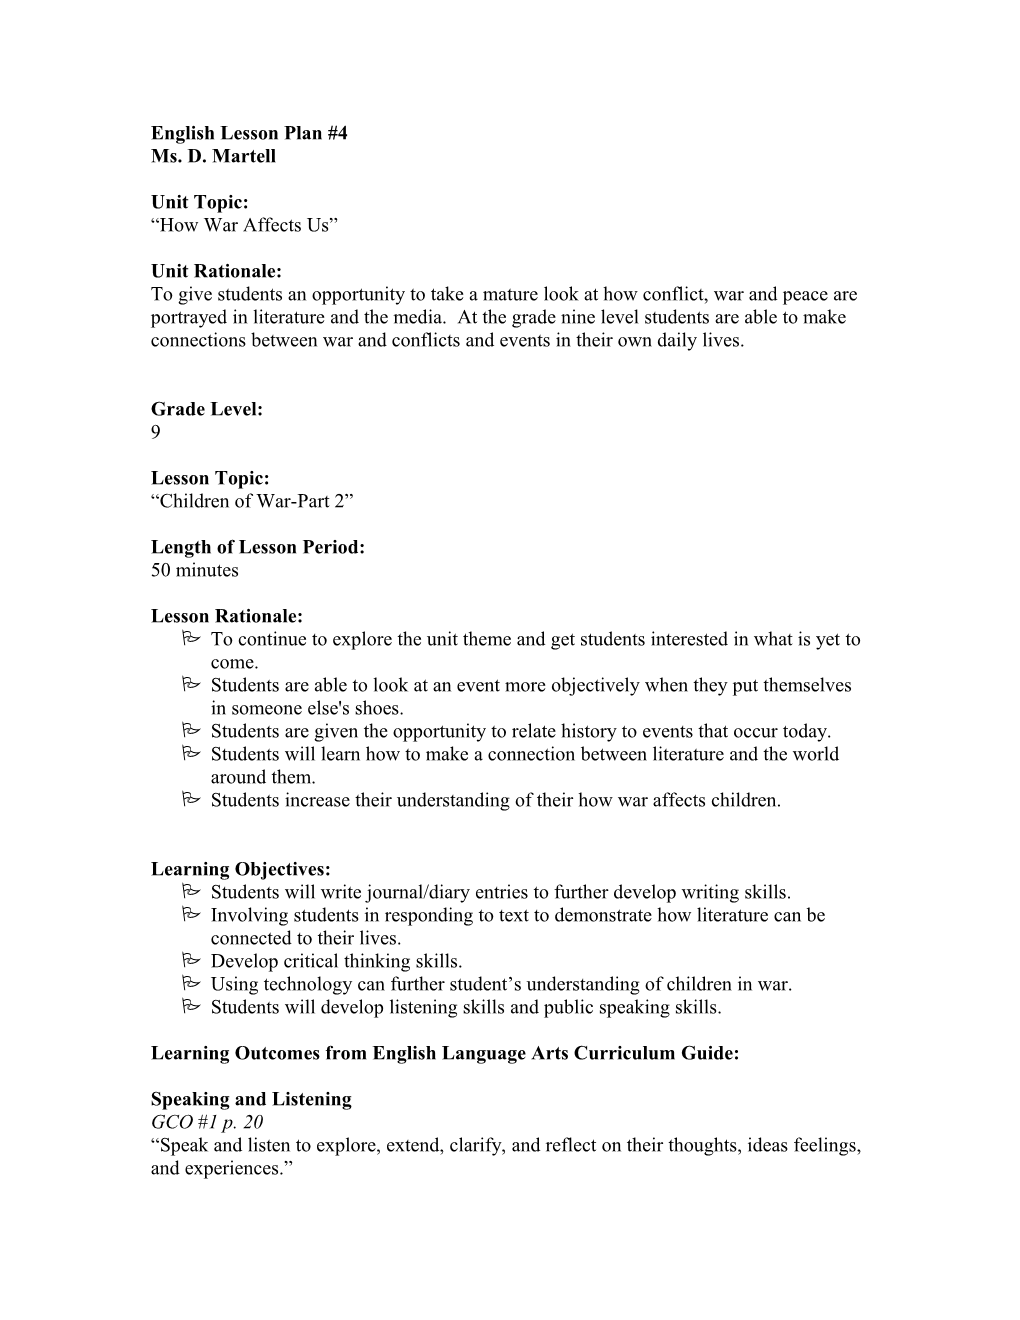 Lesson Template for Education 4353